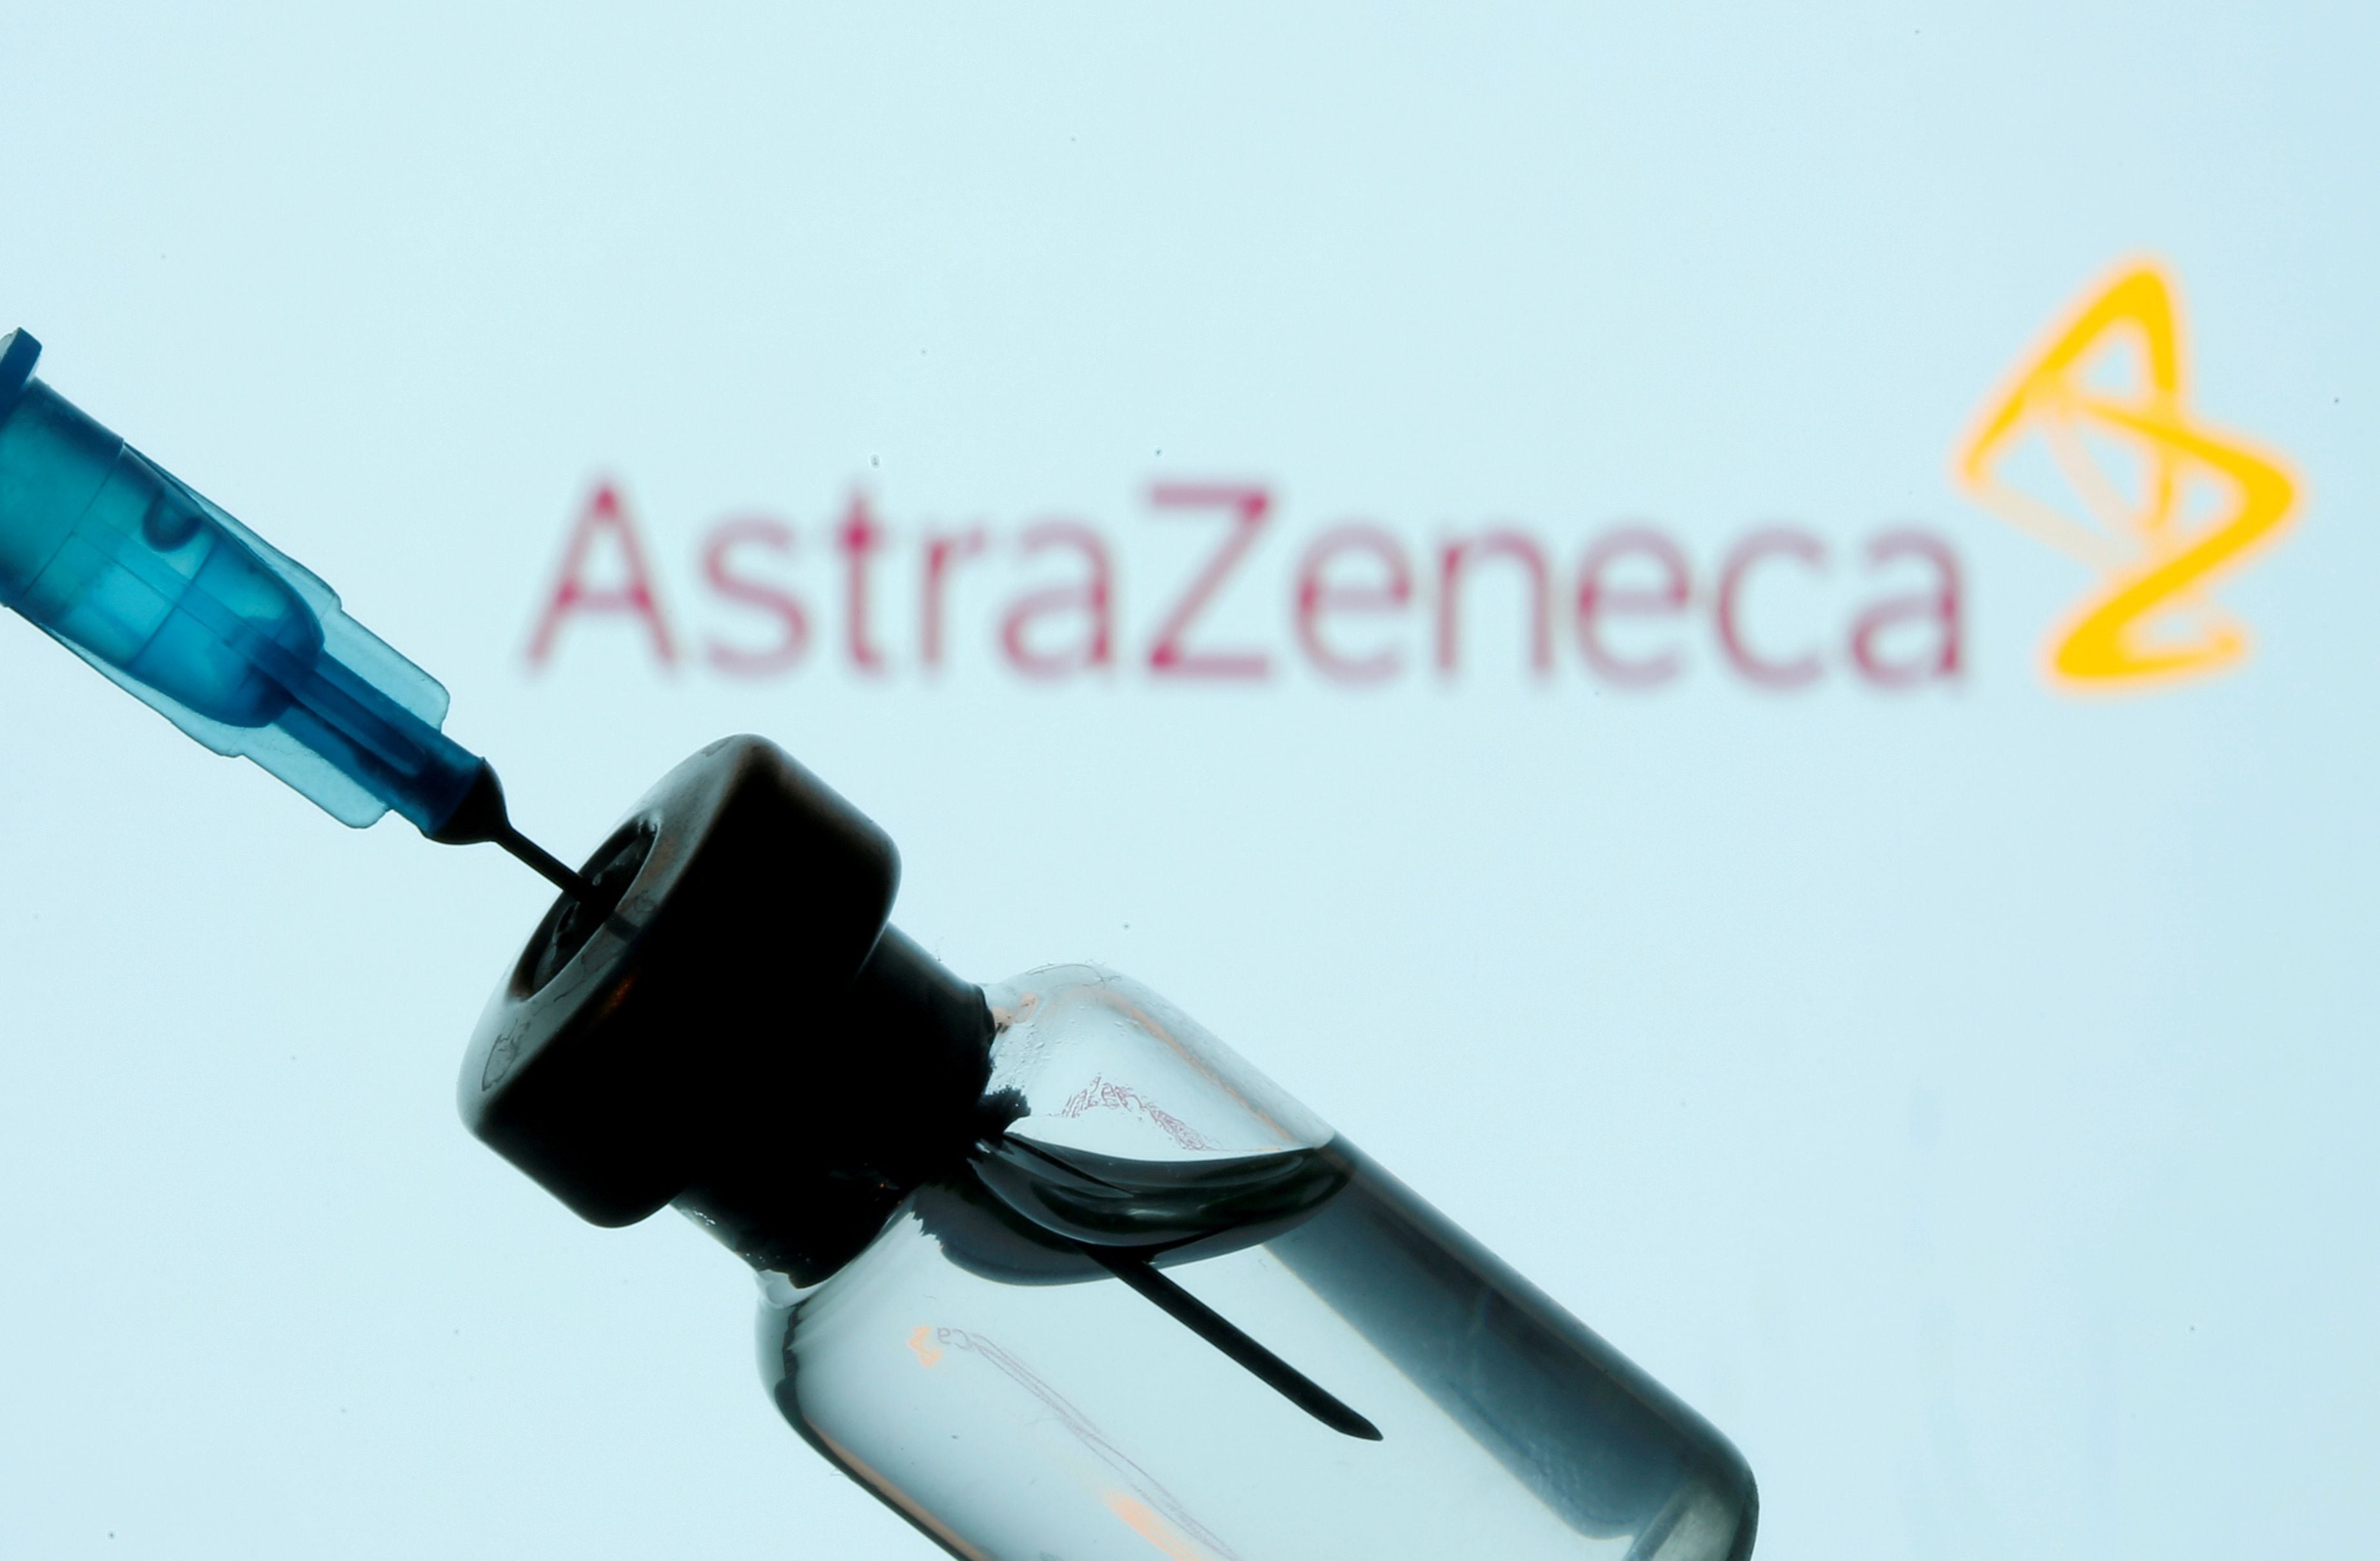 Health Canada On Track To Approve Astrazeneca Covid 19 Vaccine By Mid February The Globe And Mail